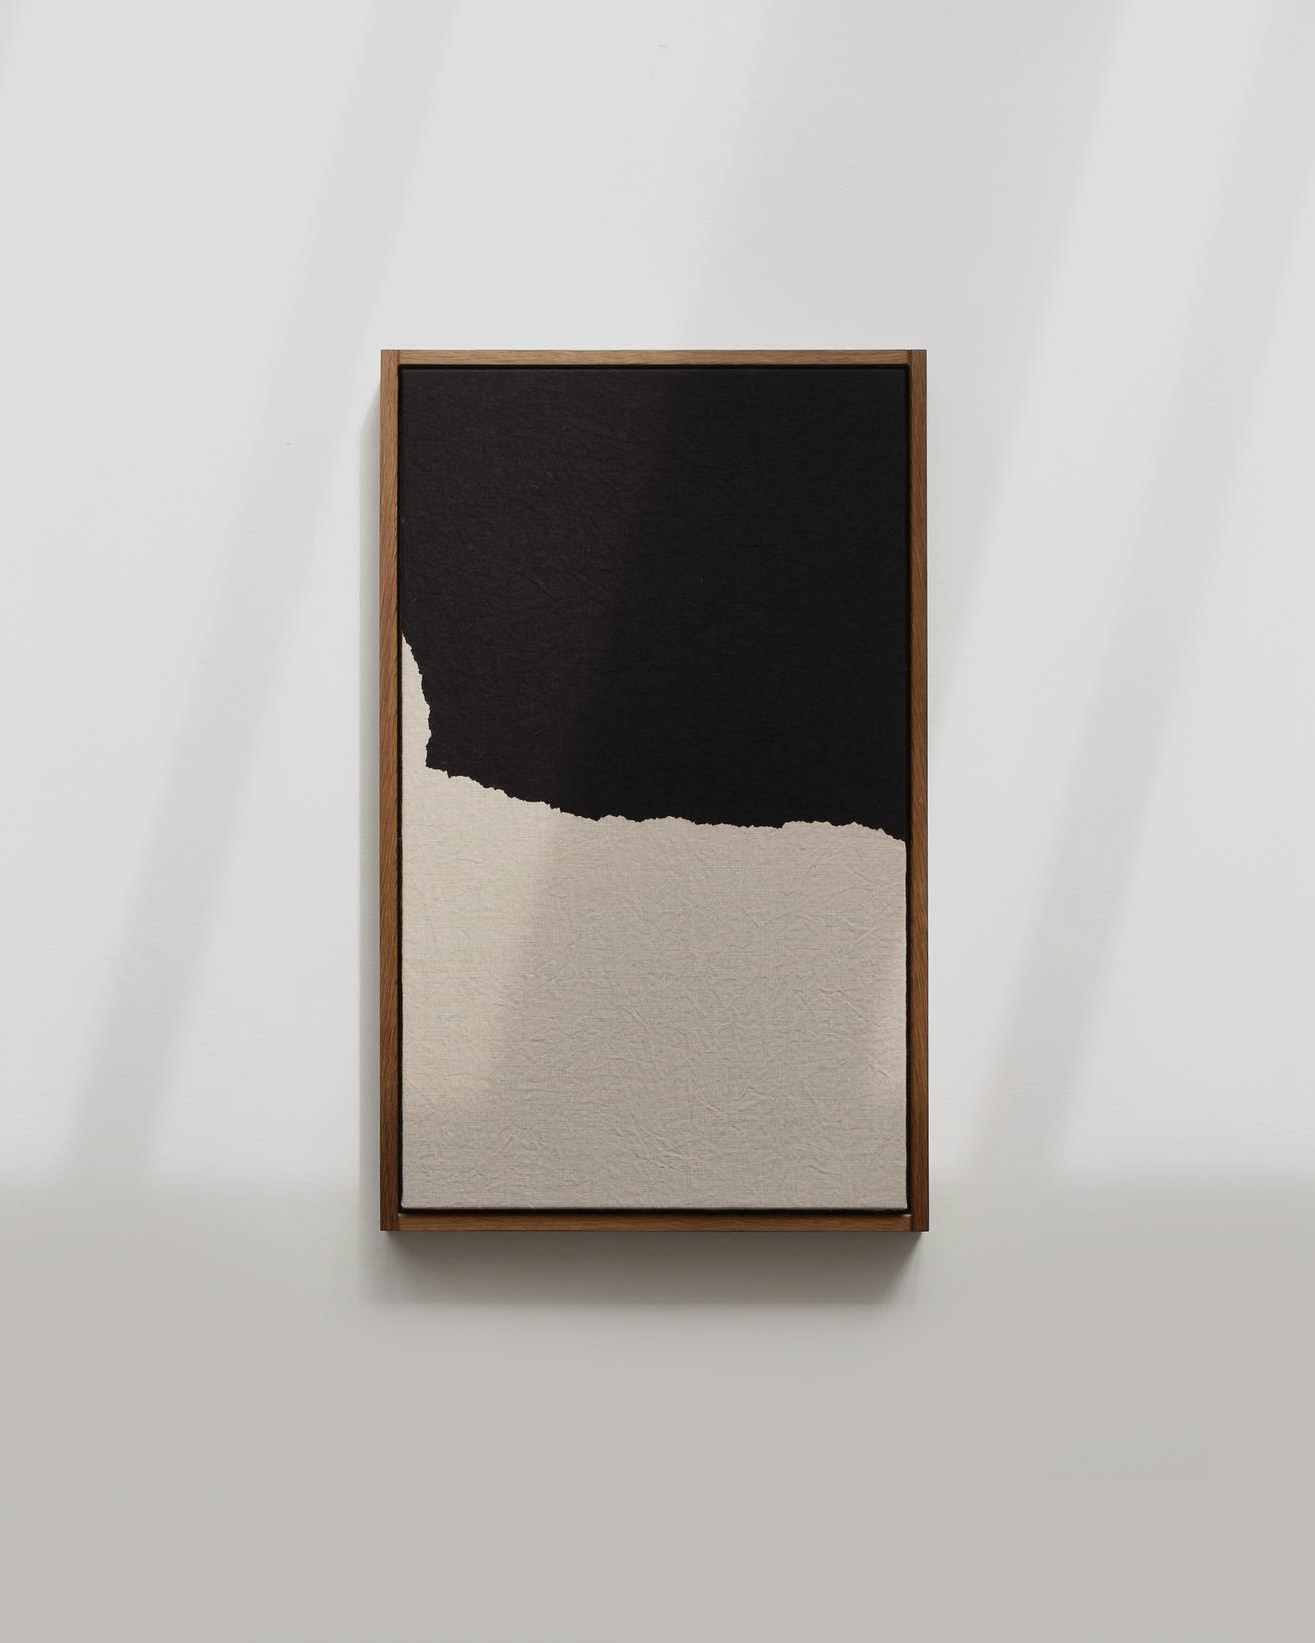 Image 3: Hayley McCrirrick, Studies in Linen, 2020, Dip-dyed linen in a Scottish oak frame, 30x50 cm © The Artist, Image via The Ode To